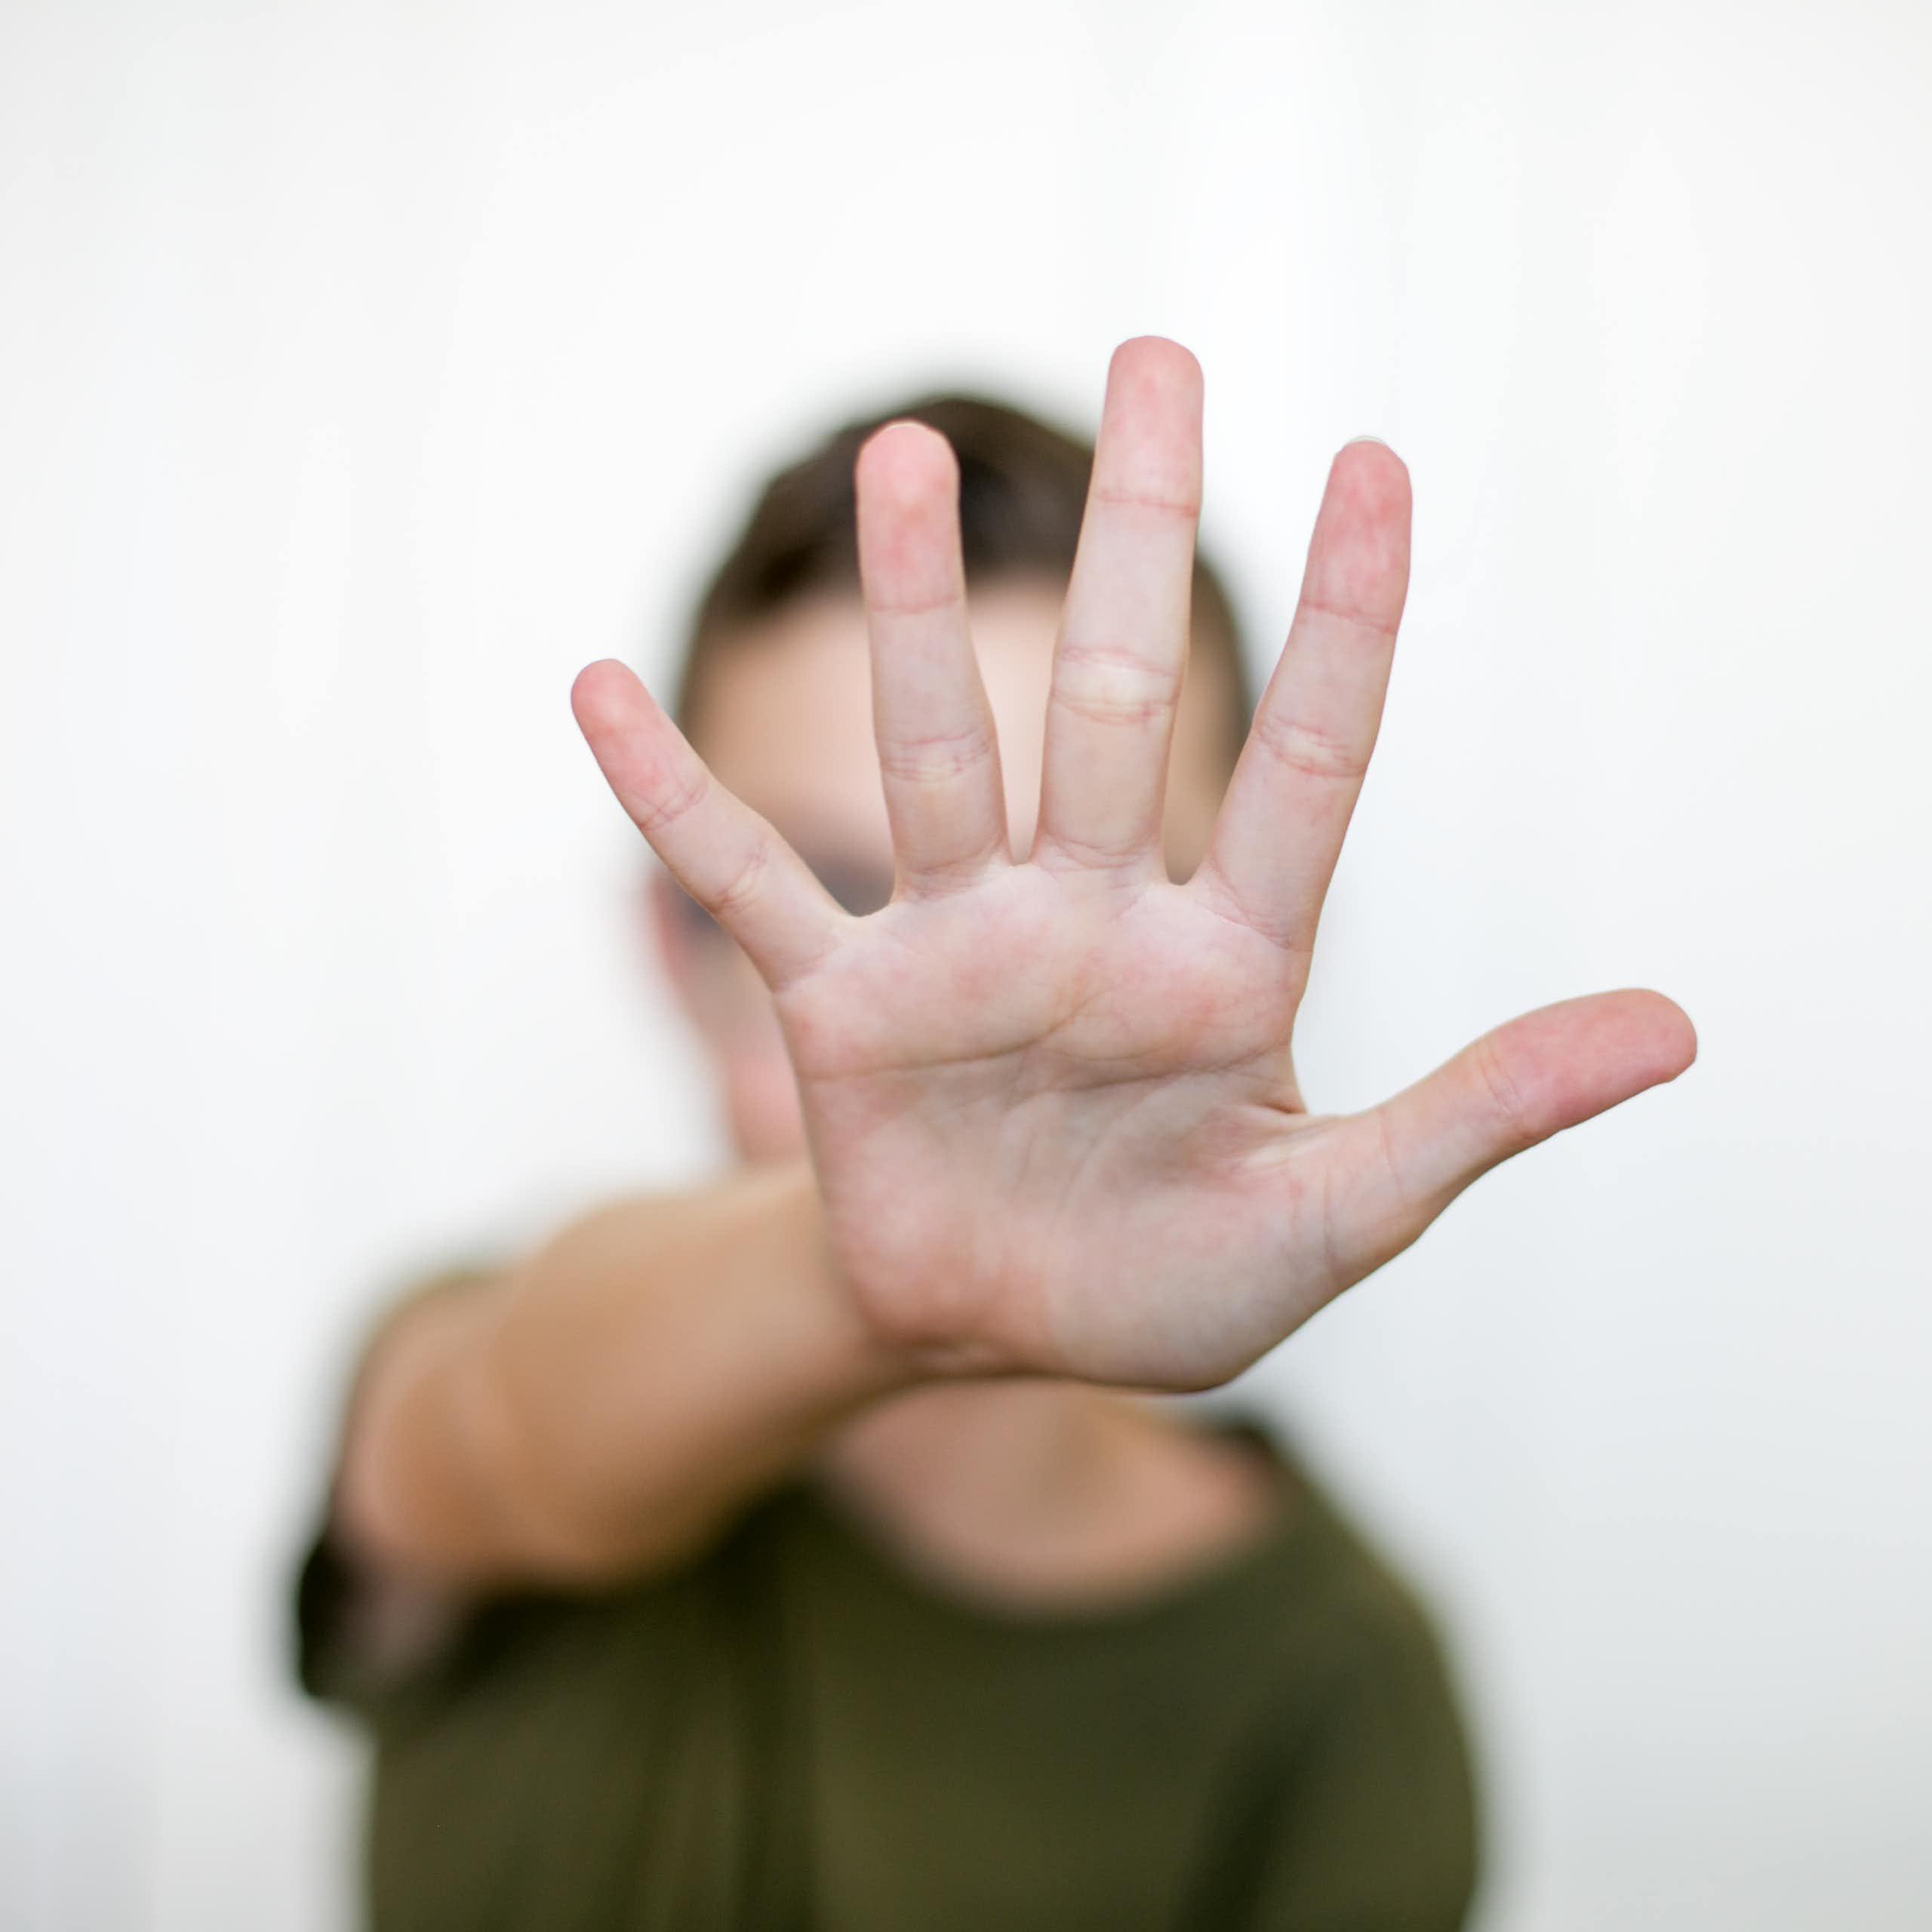 A person with an arm straight out, palm facing the camera, fingers extended.